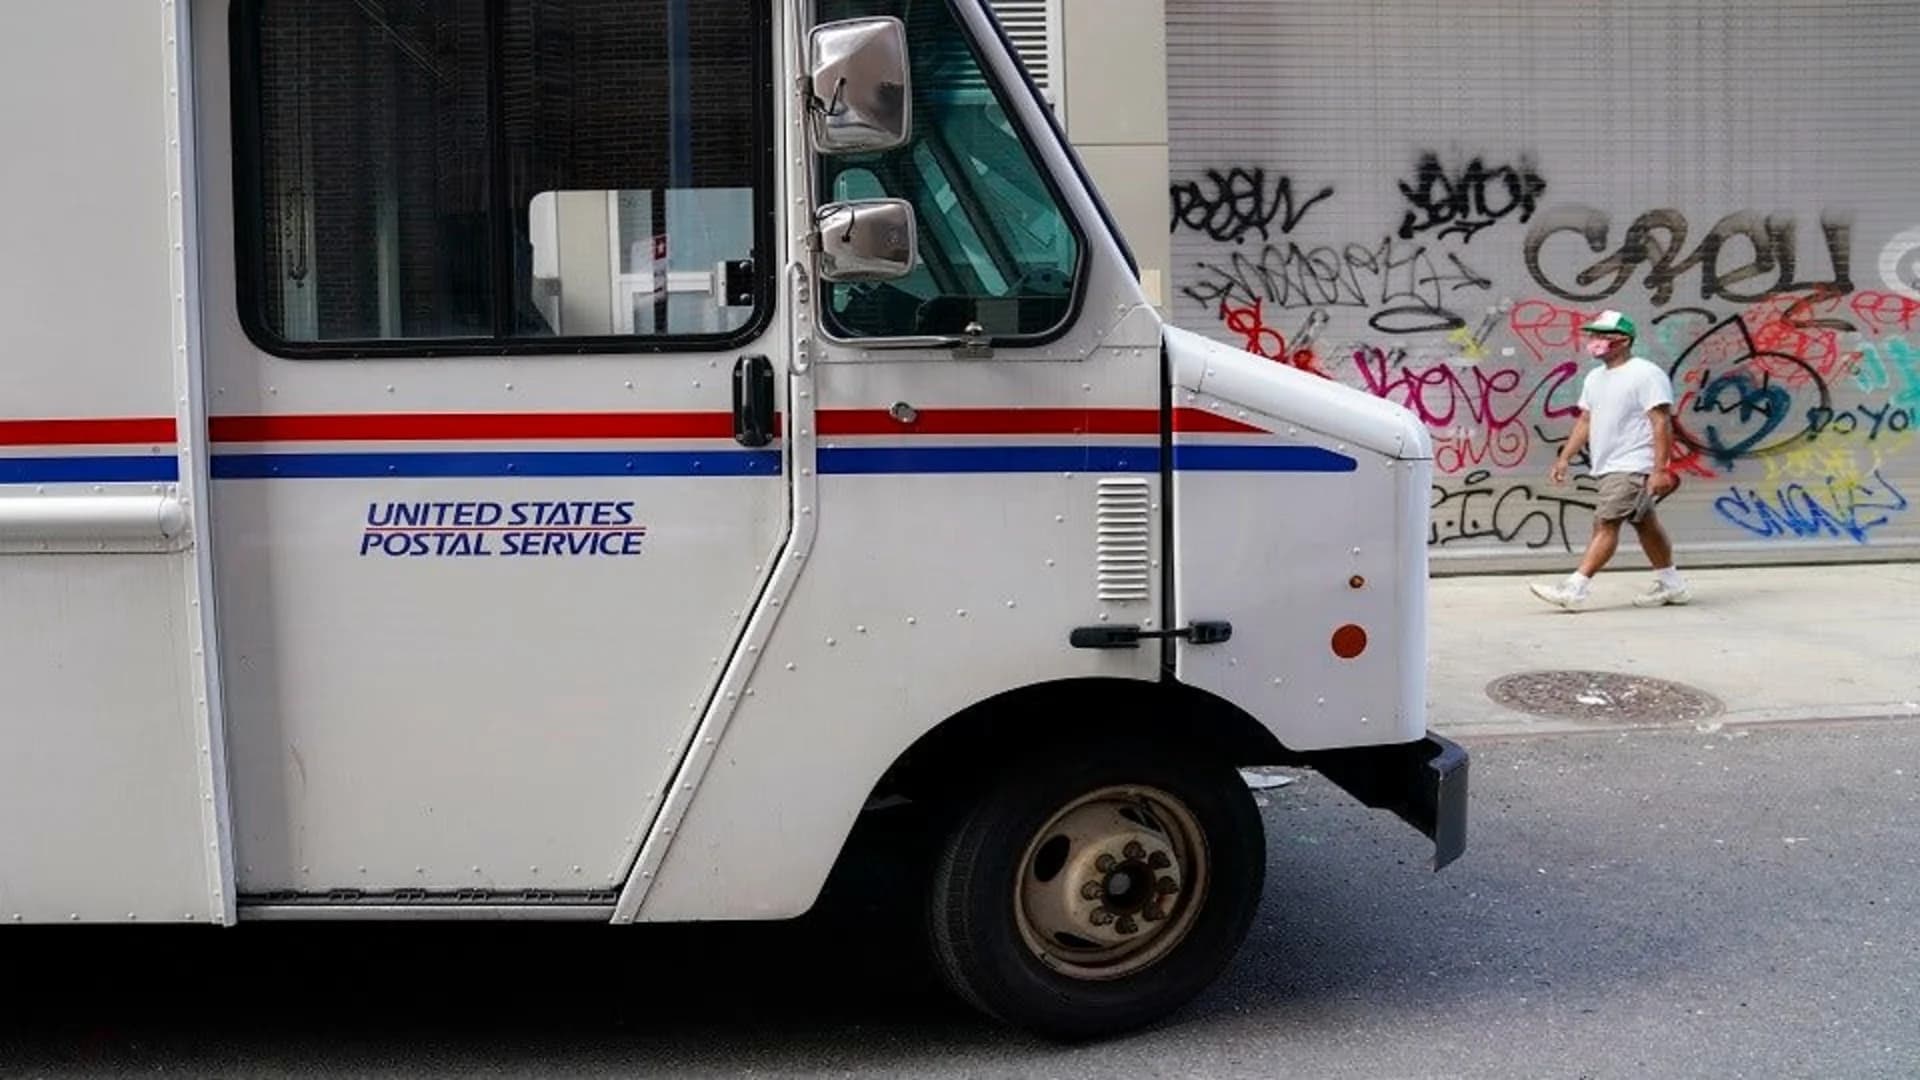 Postal Service halts some operational changes after outcry